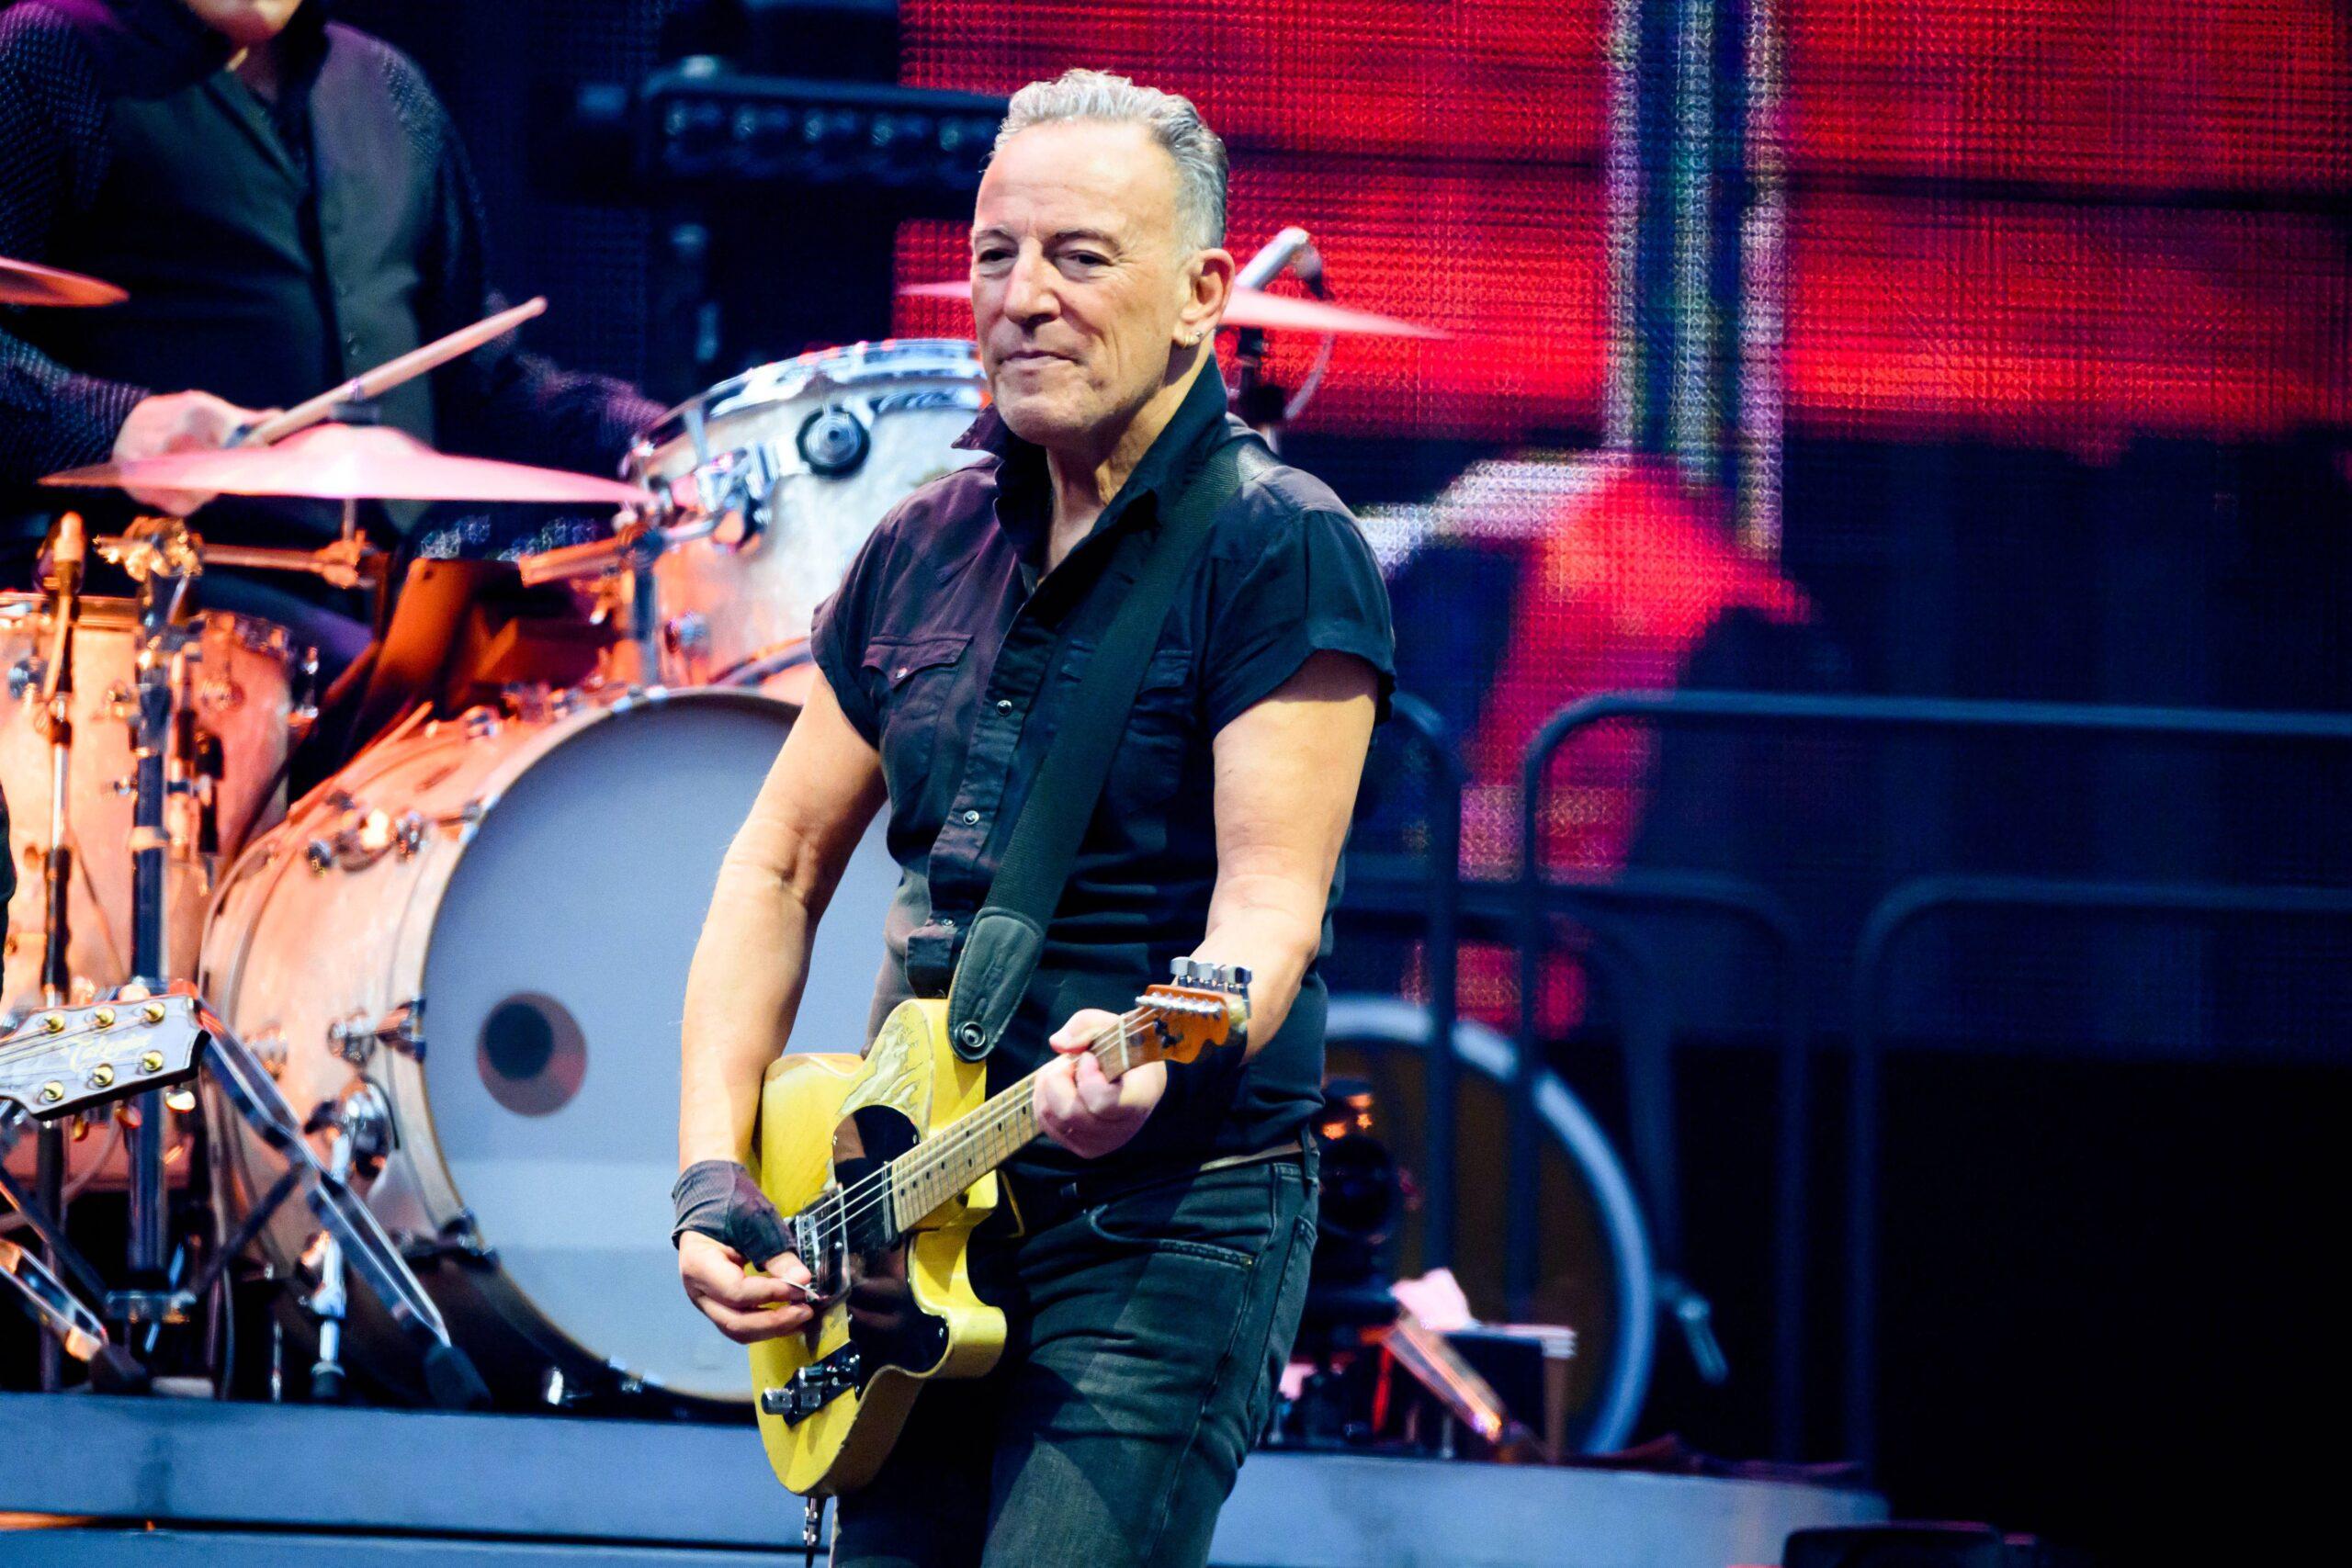 Bruce Springsteen during a performance with The E Street band at the Johan Cruijff ArenA in Amsterdam. The concert is part of the stadium tour with which 'The Boss' travels through Europe